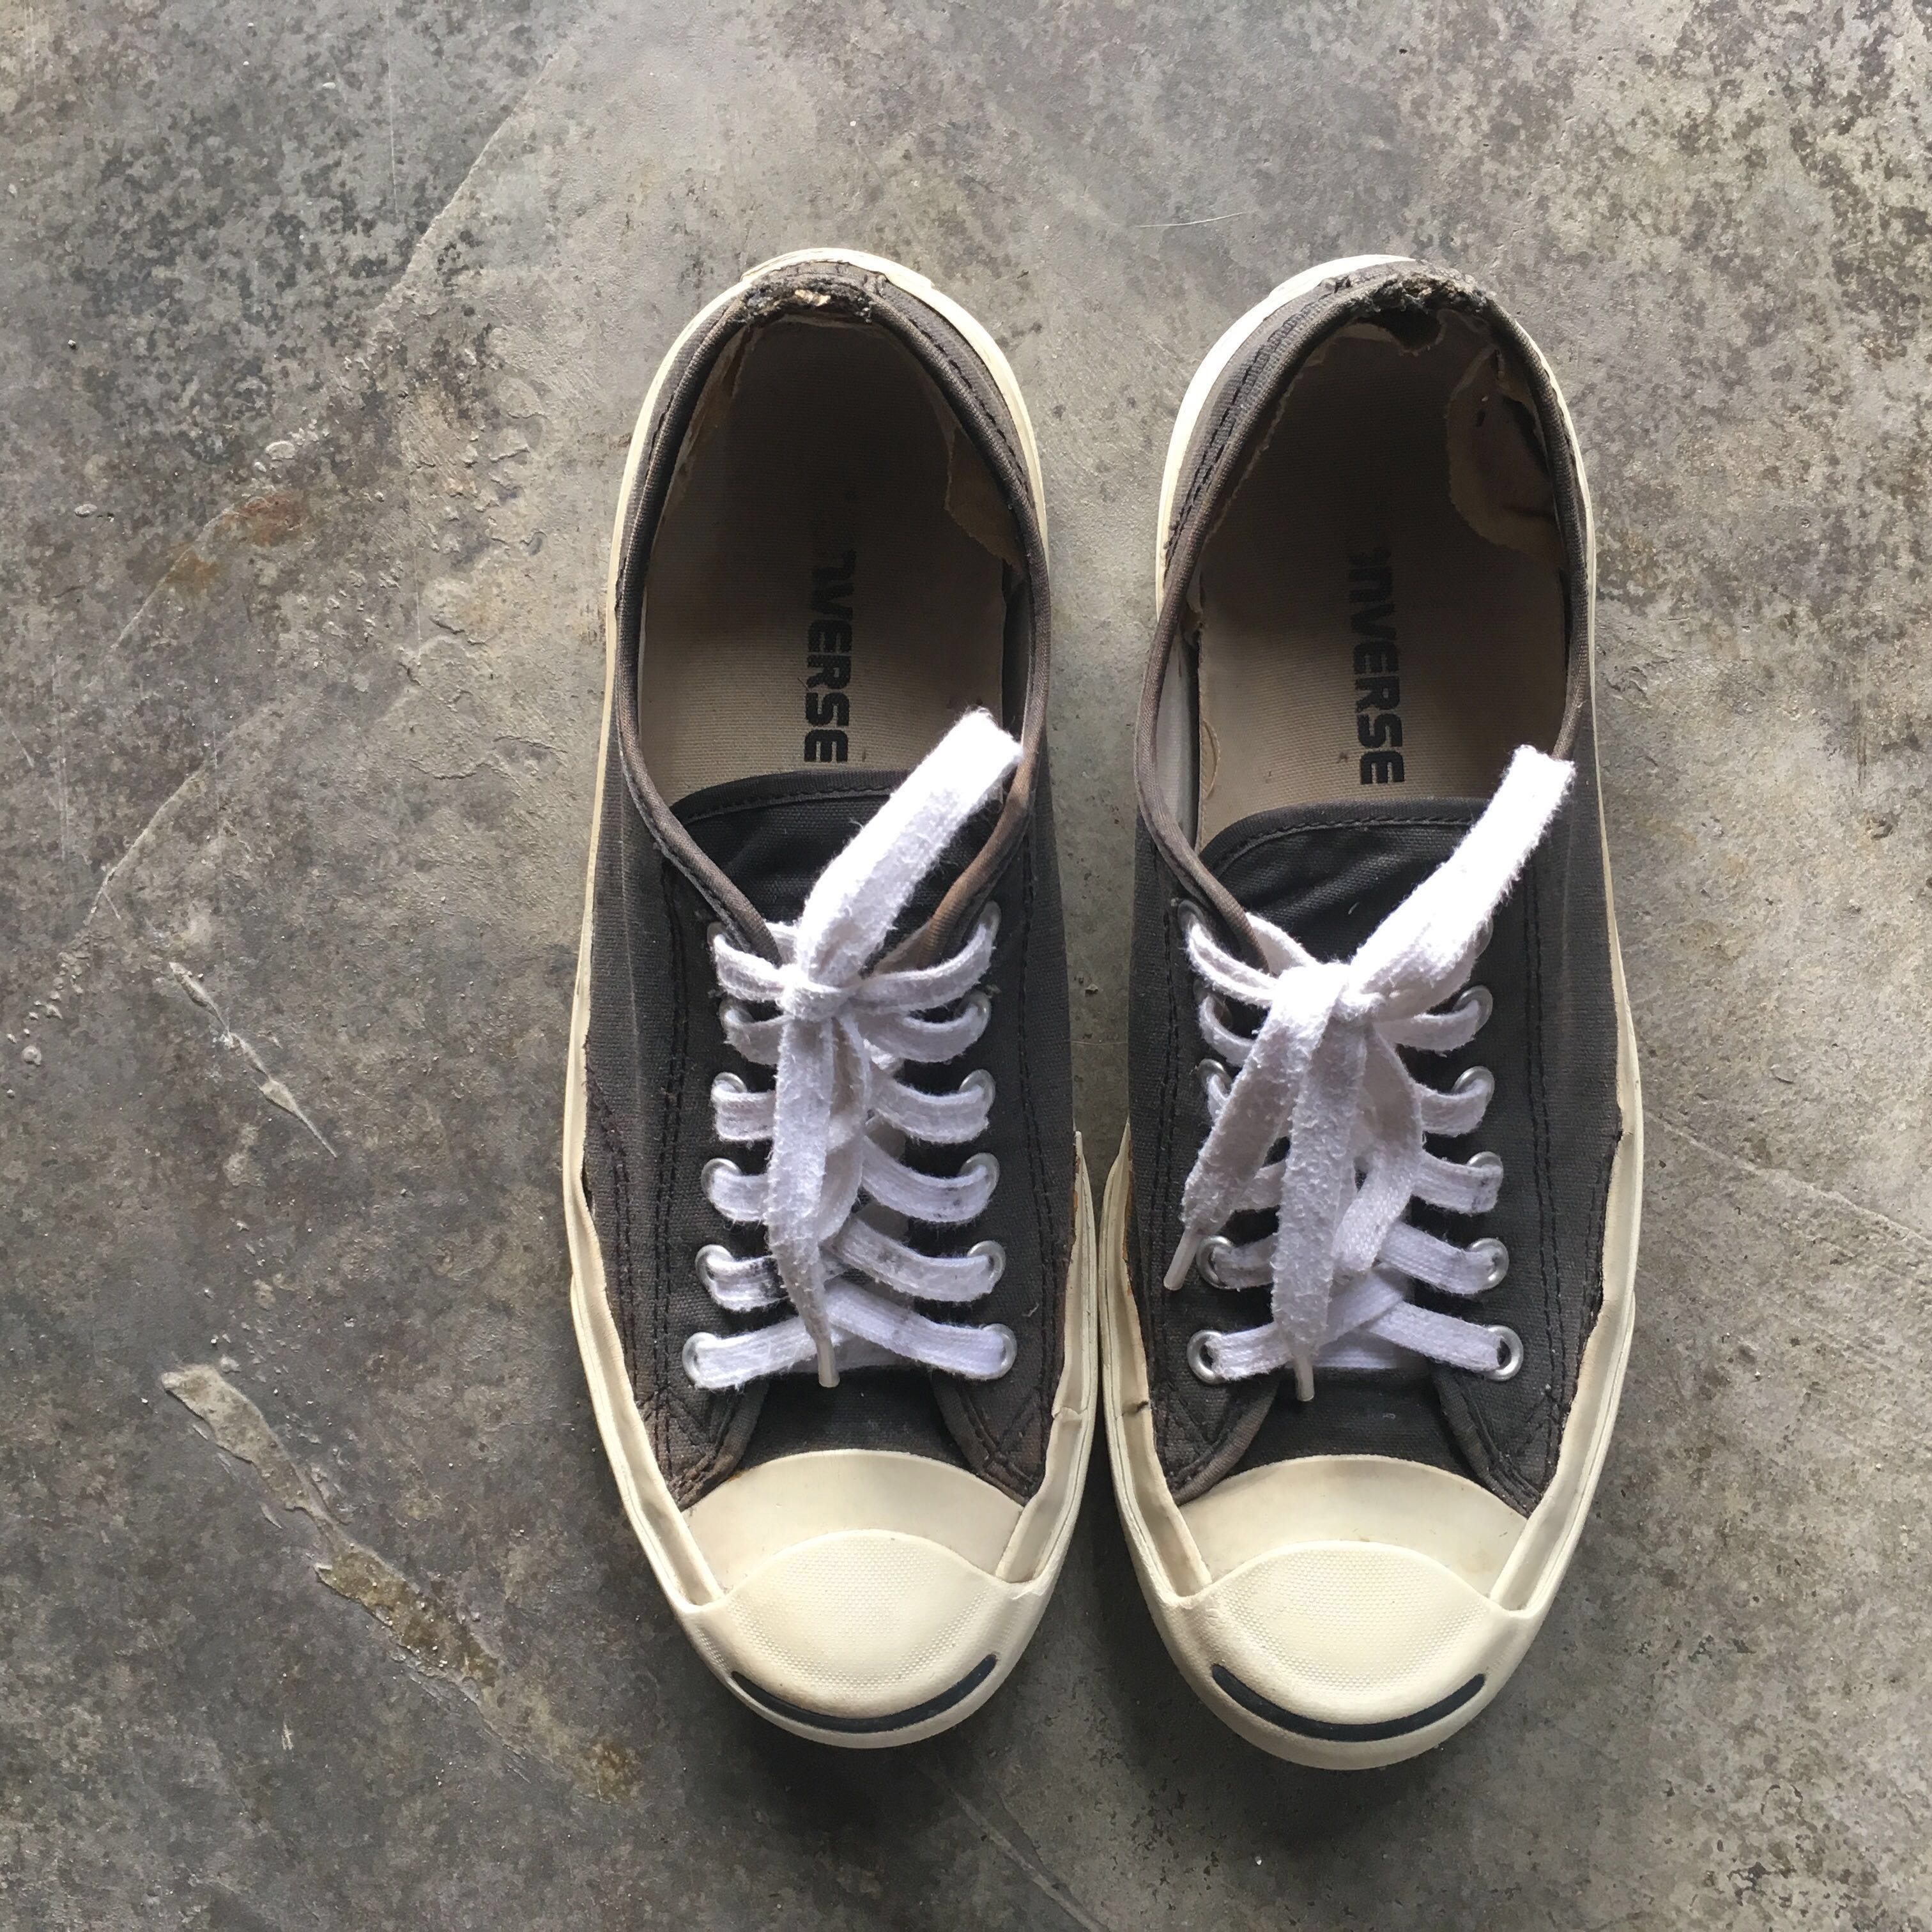 Converse Jack Purcell Made In Indonesia 